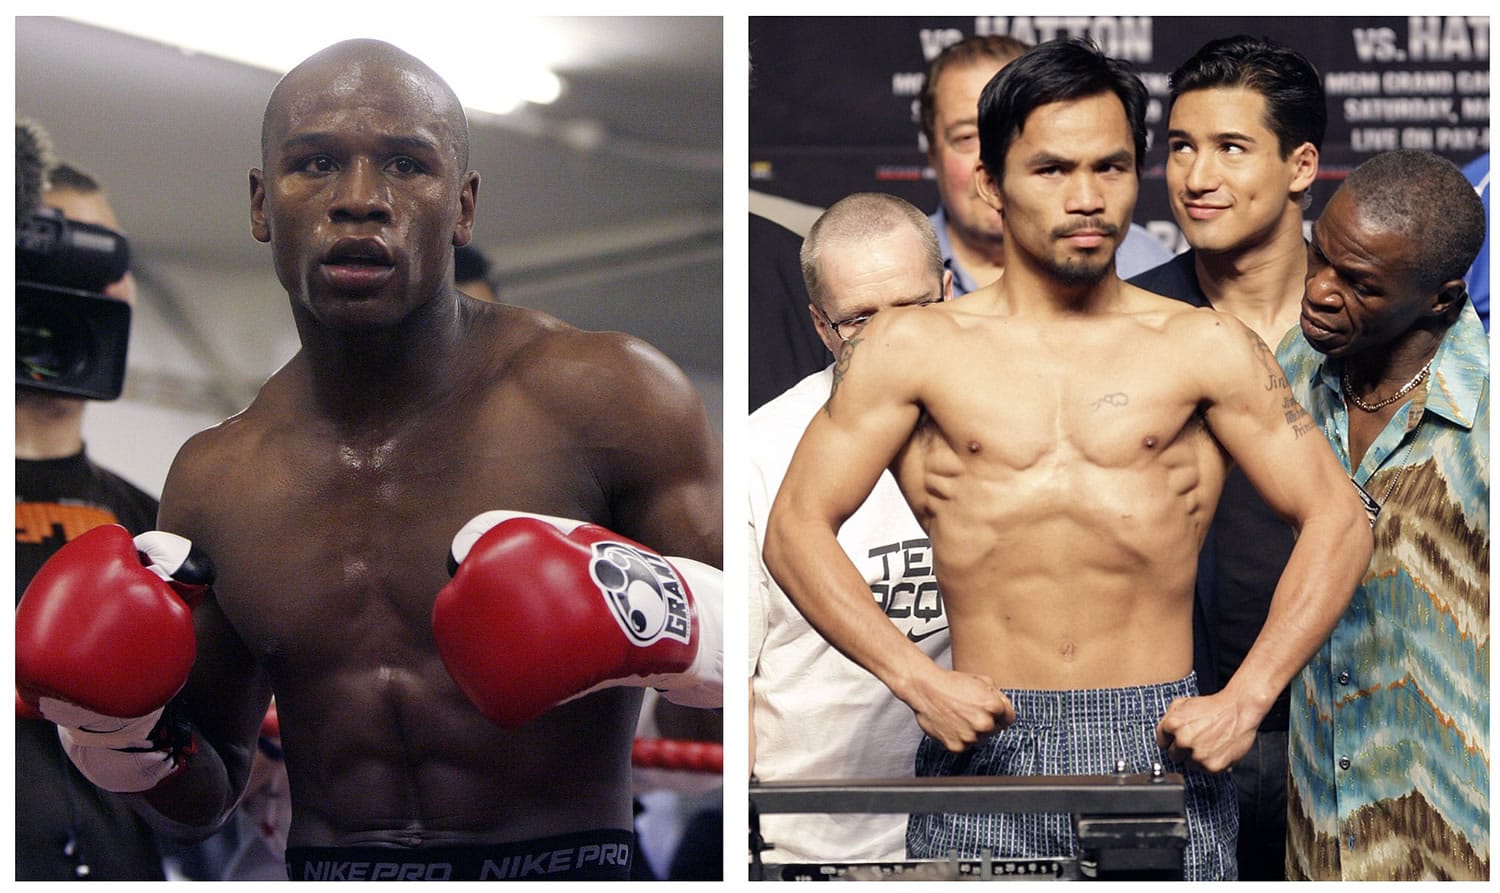 Floyd Mayweather Jr., left, in a 2009 photo, and Manny Pacquiao, right, at a weigh-in on May 1, 2009, in Las Vegas will meet on May 2, 2015 in a welterweight showdown that will be boxing's richest fight ever.